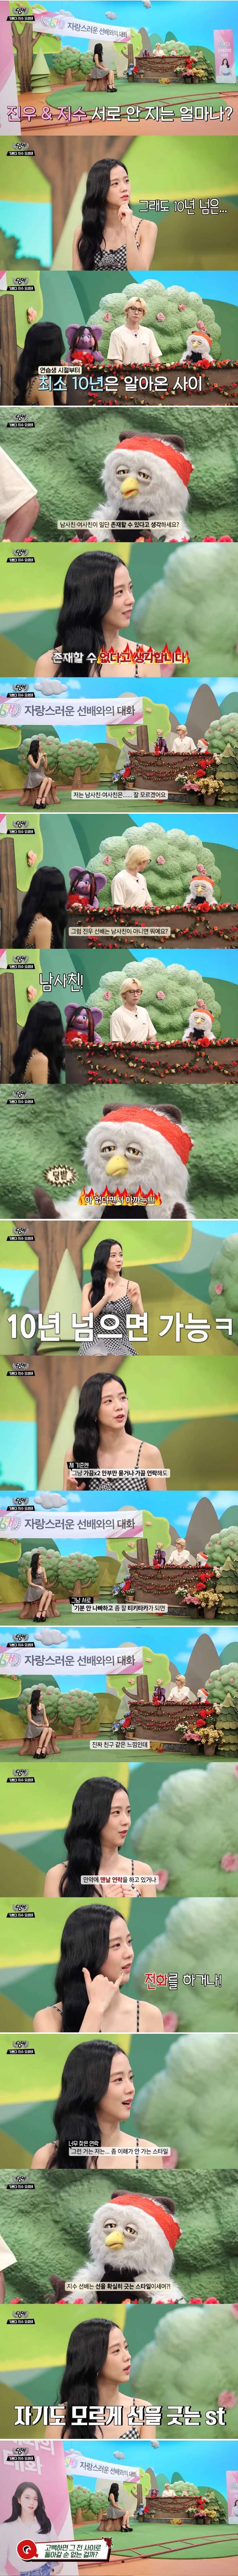 BLACKPINK Jisoo came out on EBS and said her opinion when asked about male and female friends